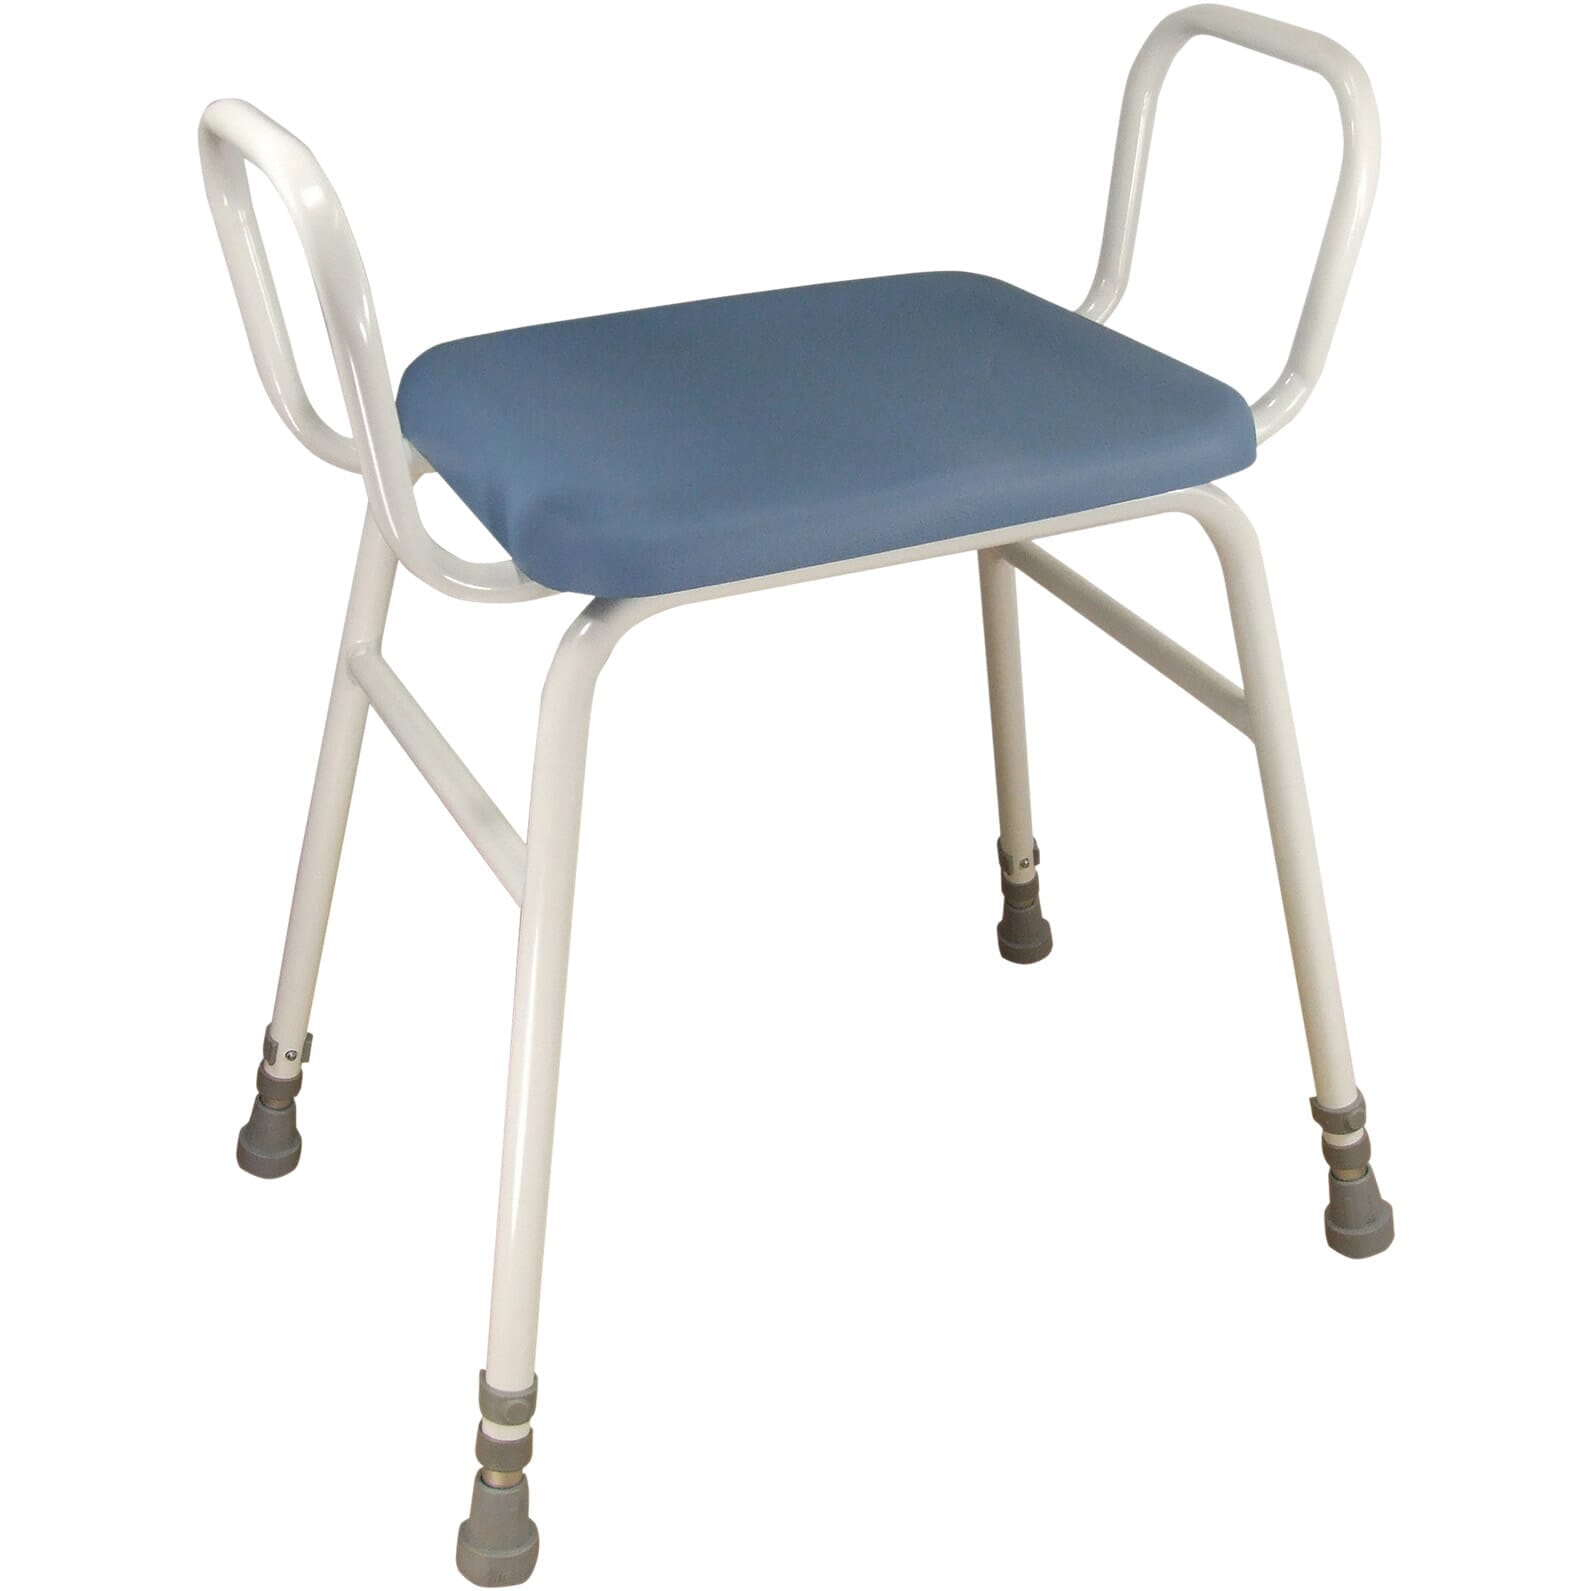 View Comfy Padded Perching Stool Stool with Arms information